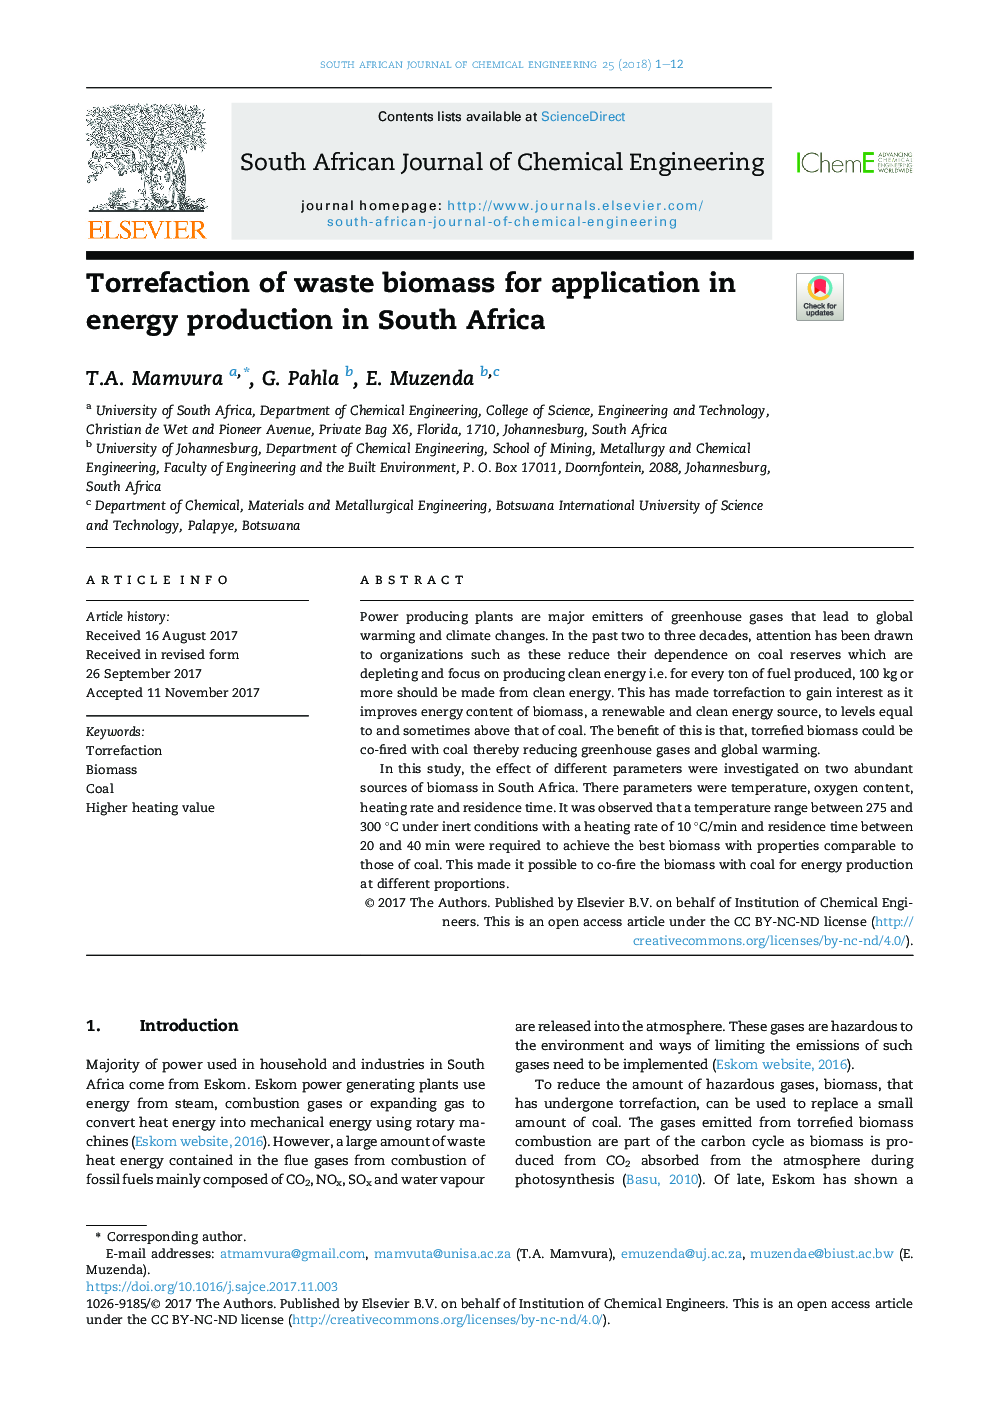 Torrefaction of waste biomass for application in energy production in South Africa